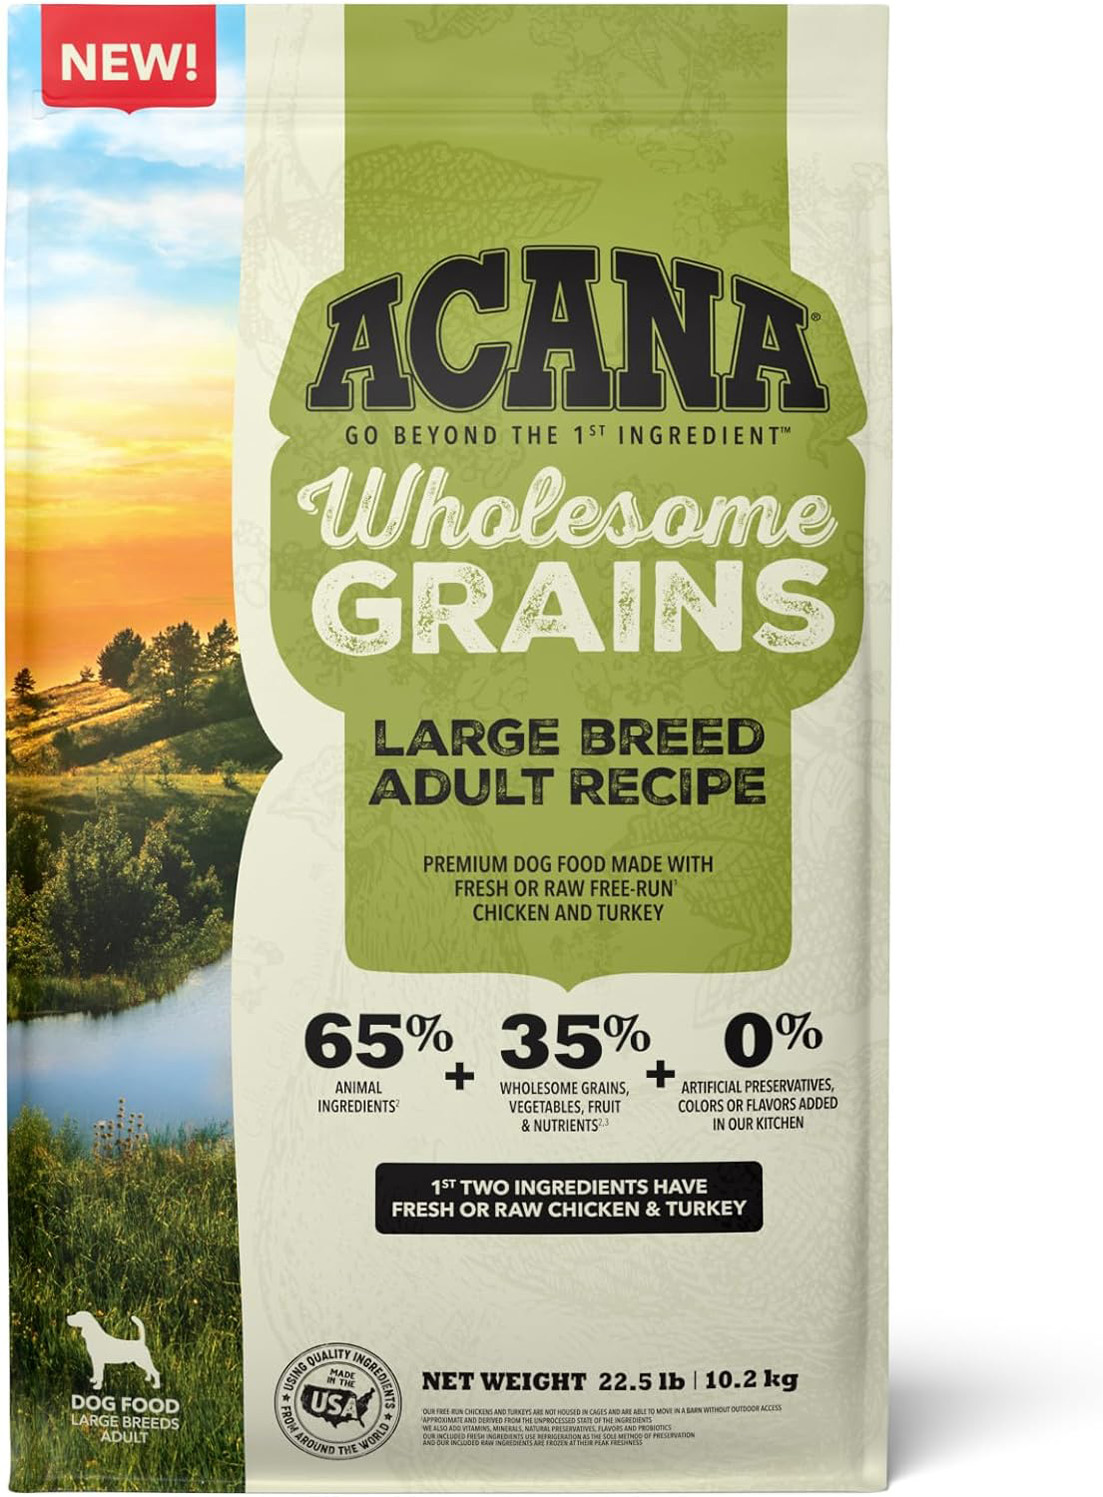 ACANA Wholesome Grains Large Breed Adult Dry Dog Food, 22.5 lbs.